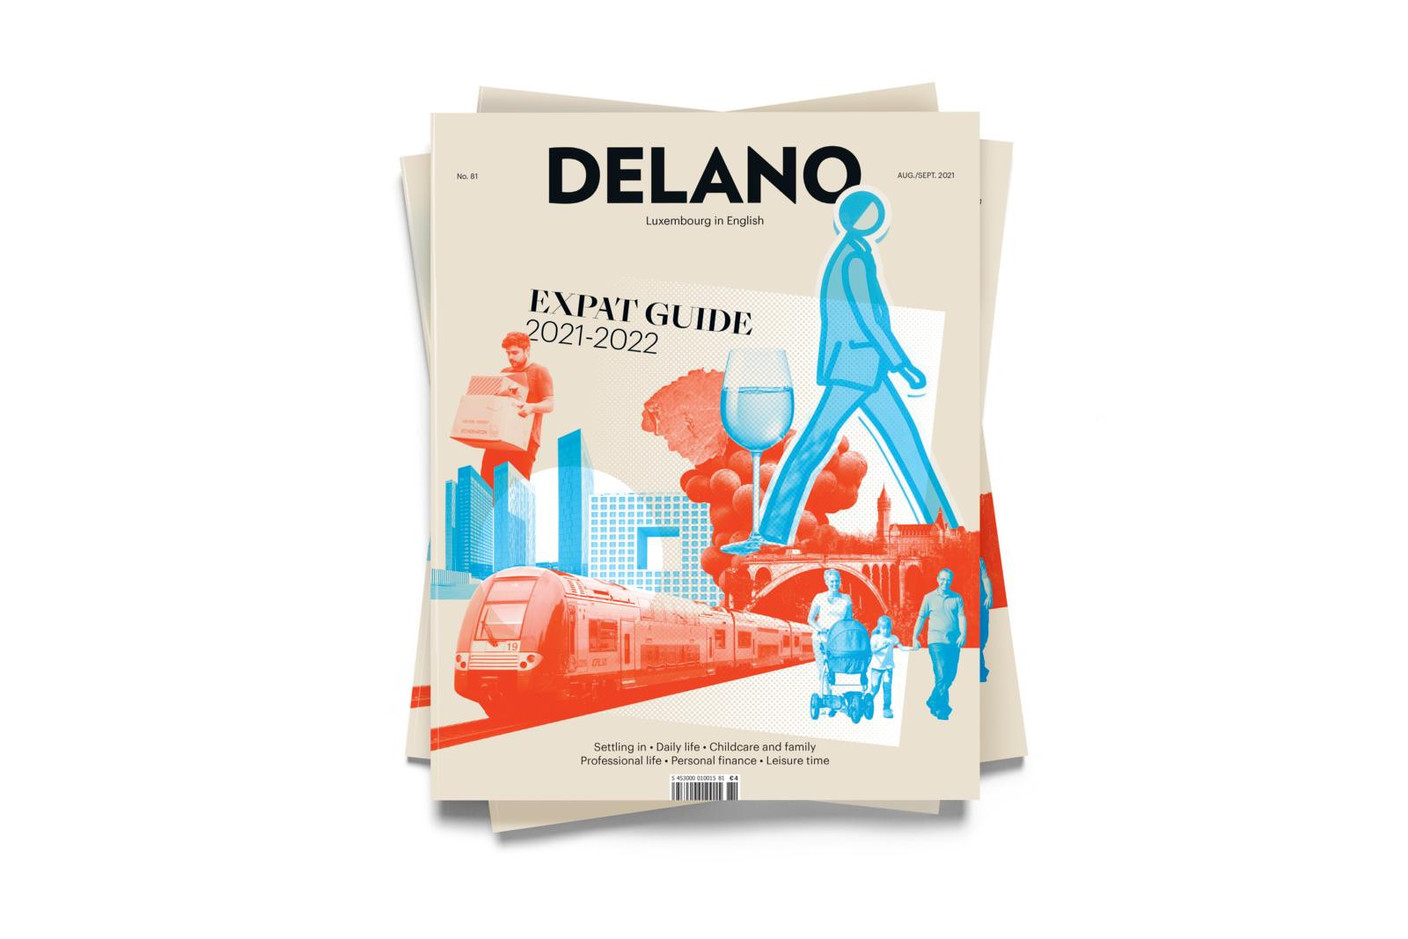 Delano’s Expat Guide 2021-22 is available on newsstands across Luxembourg from 14 July. Maison Moderne